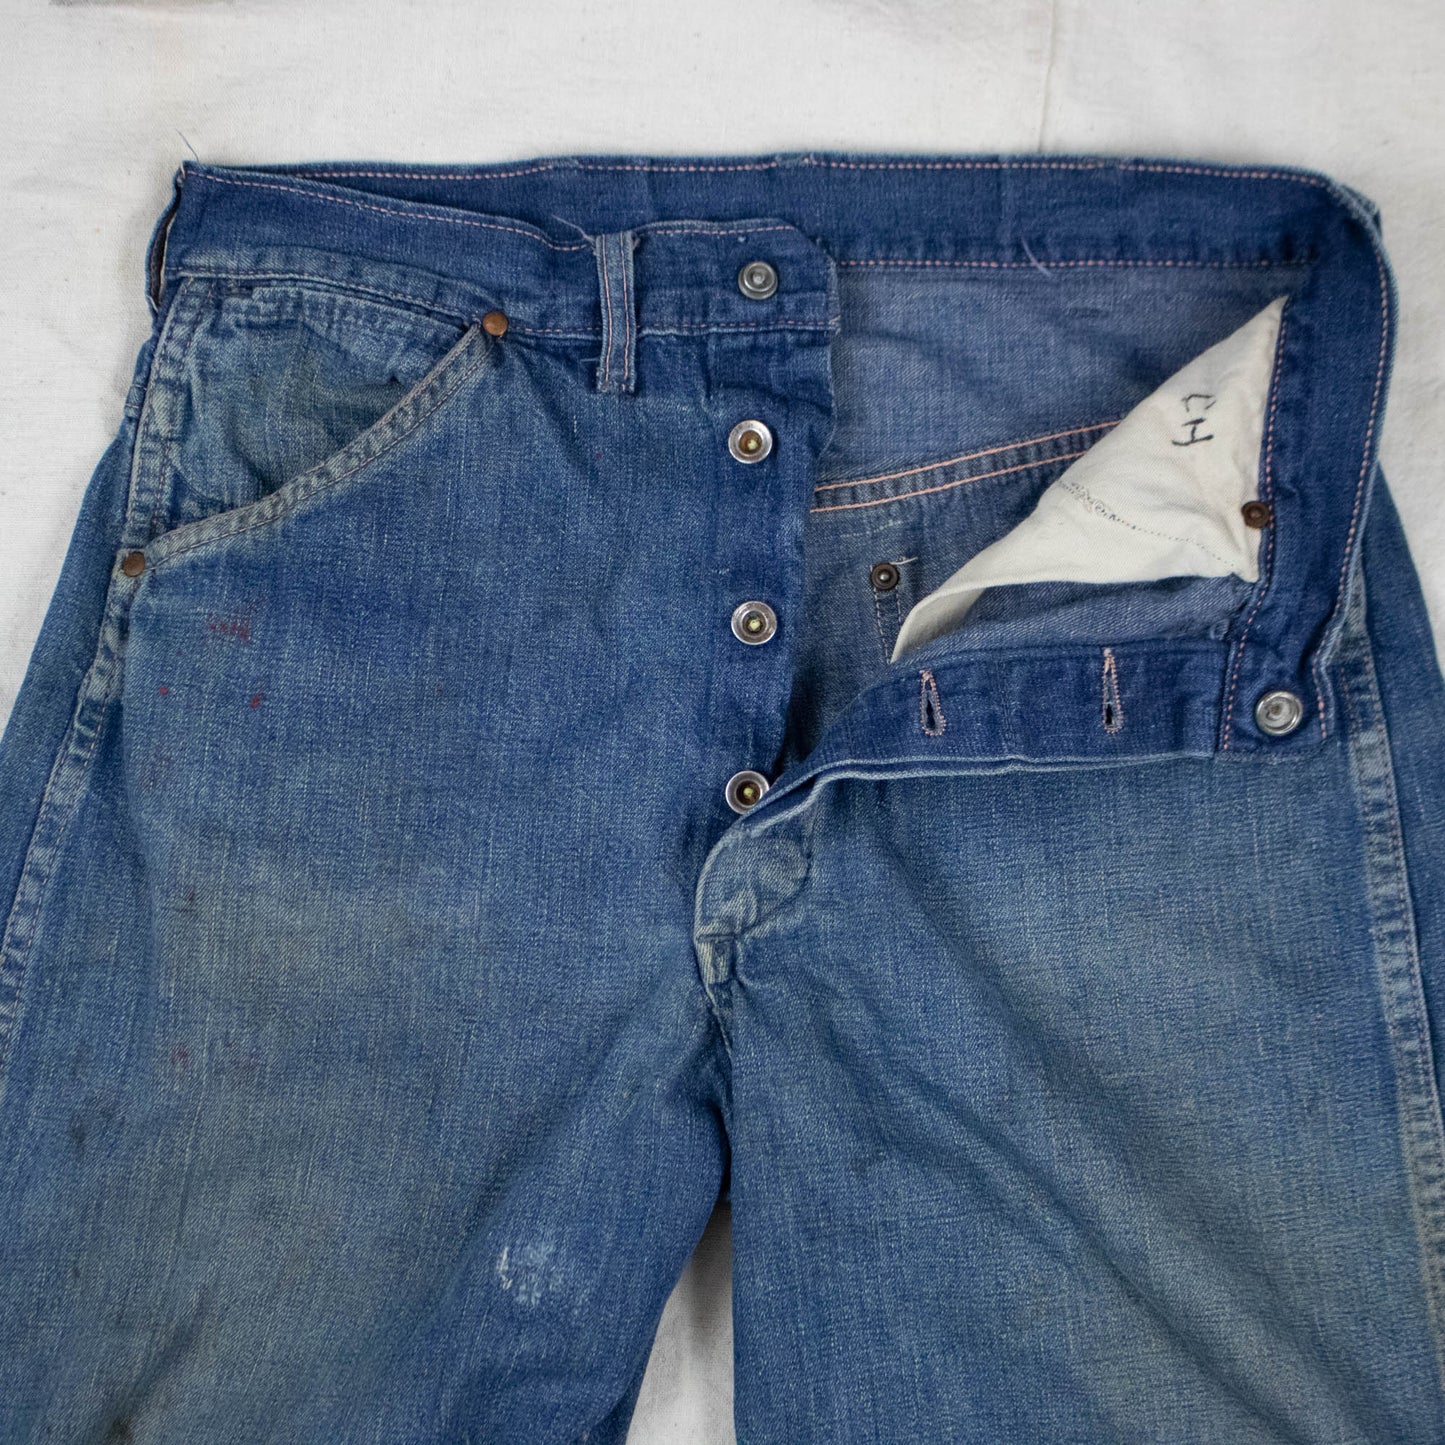 Early Doughnut Button Jeans